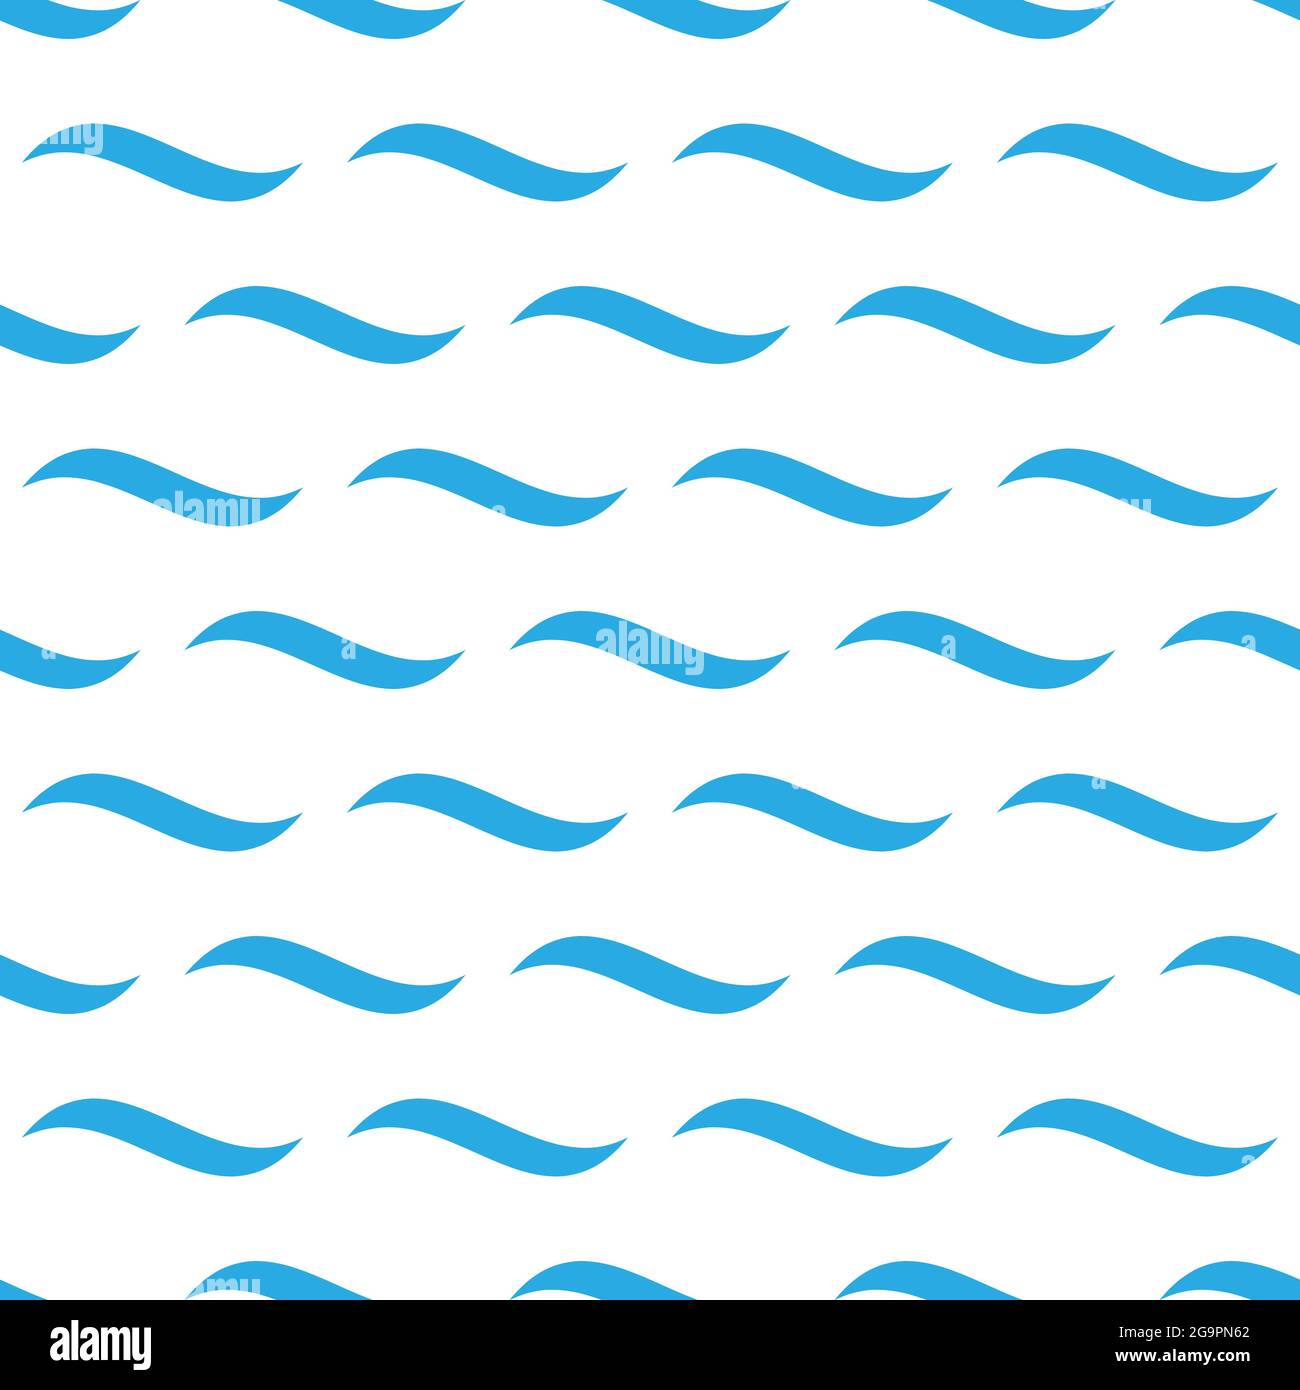 Water waves, waving, wavy, curve lines illustration – stock vector